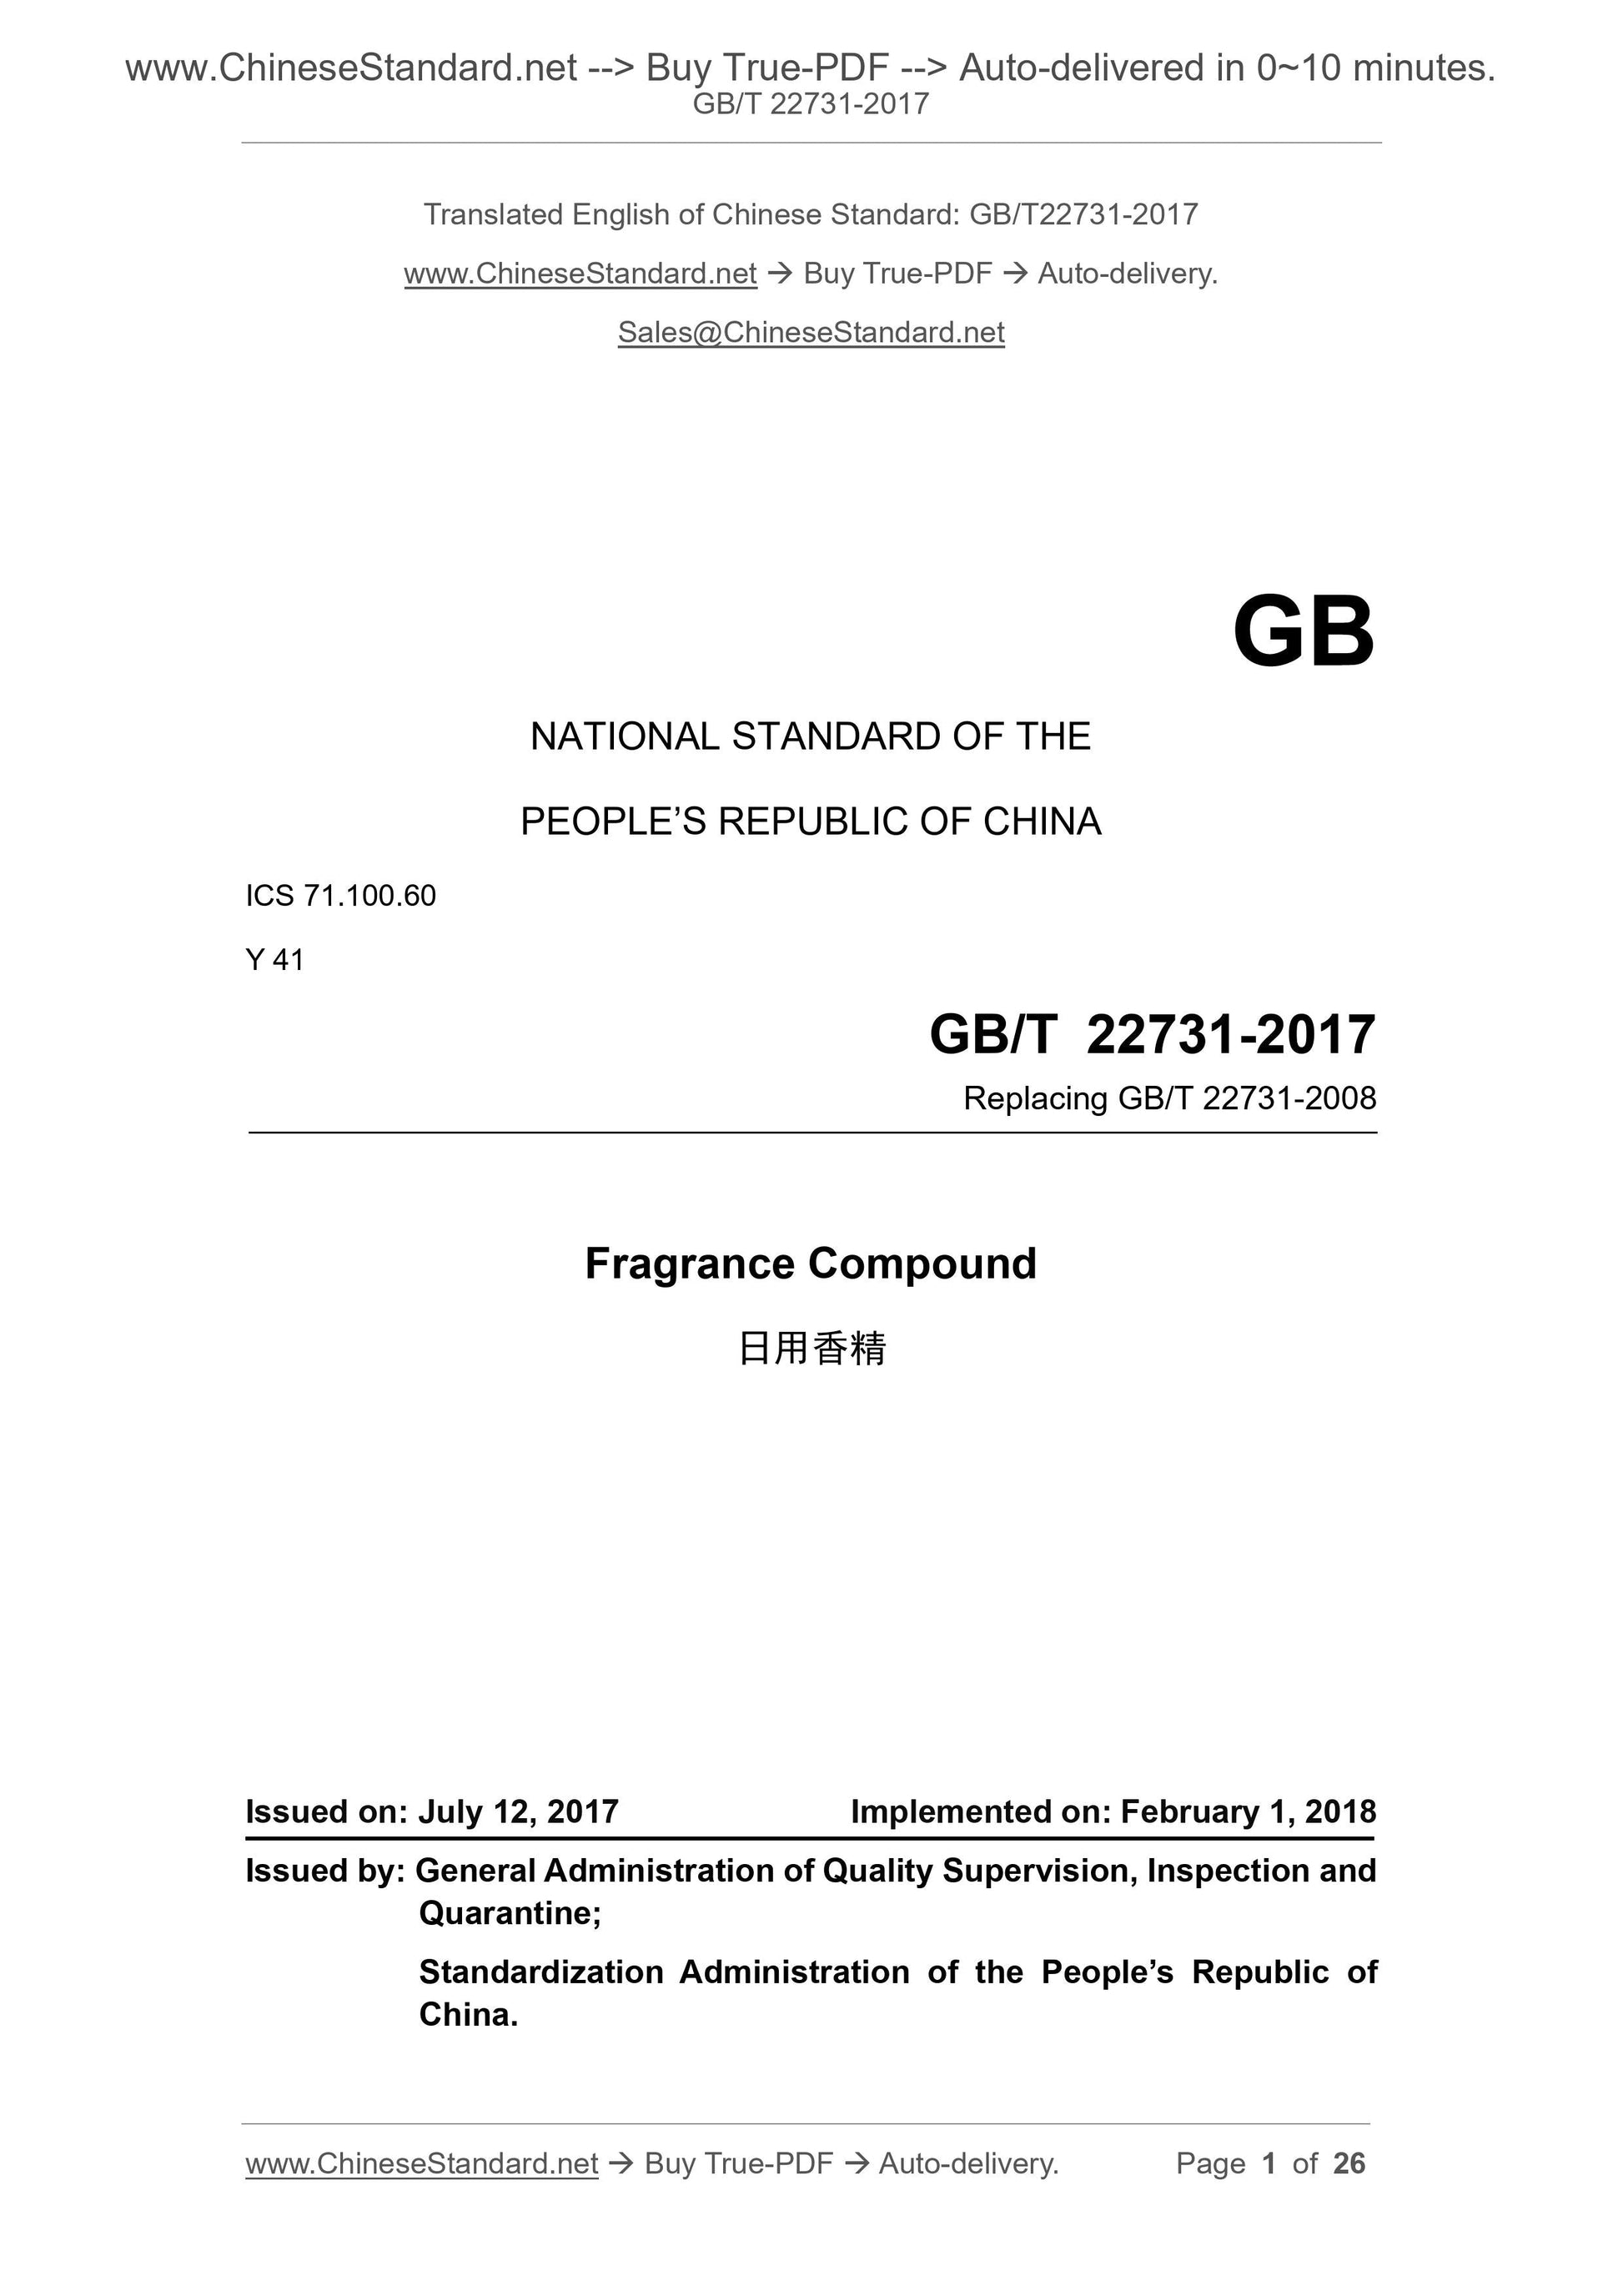 GB/T 22731-2017 Page 1